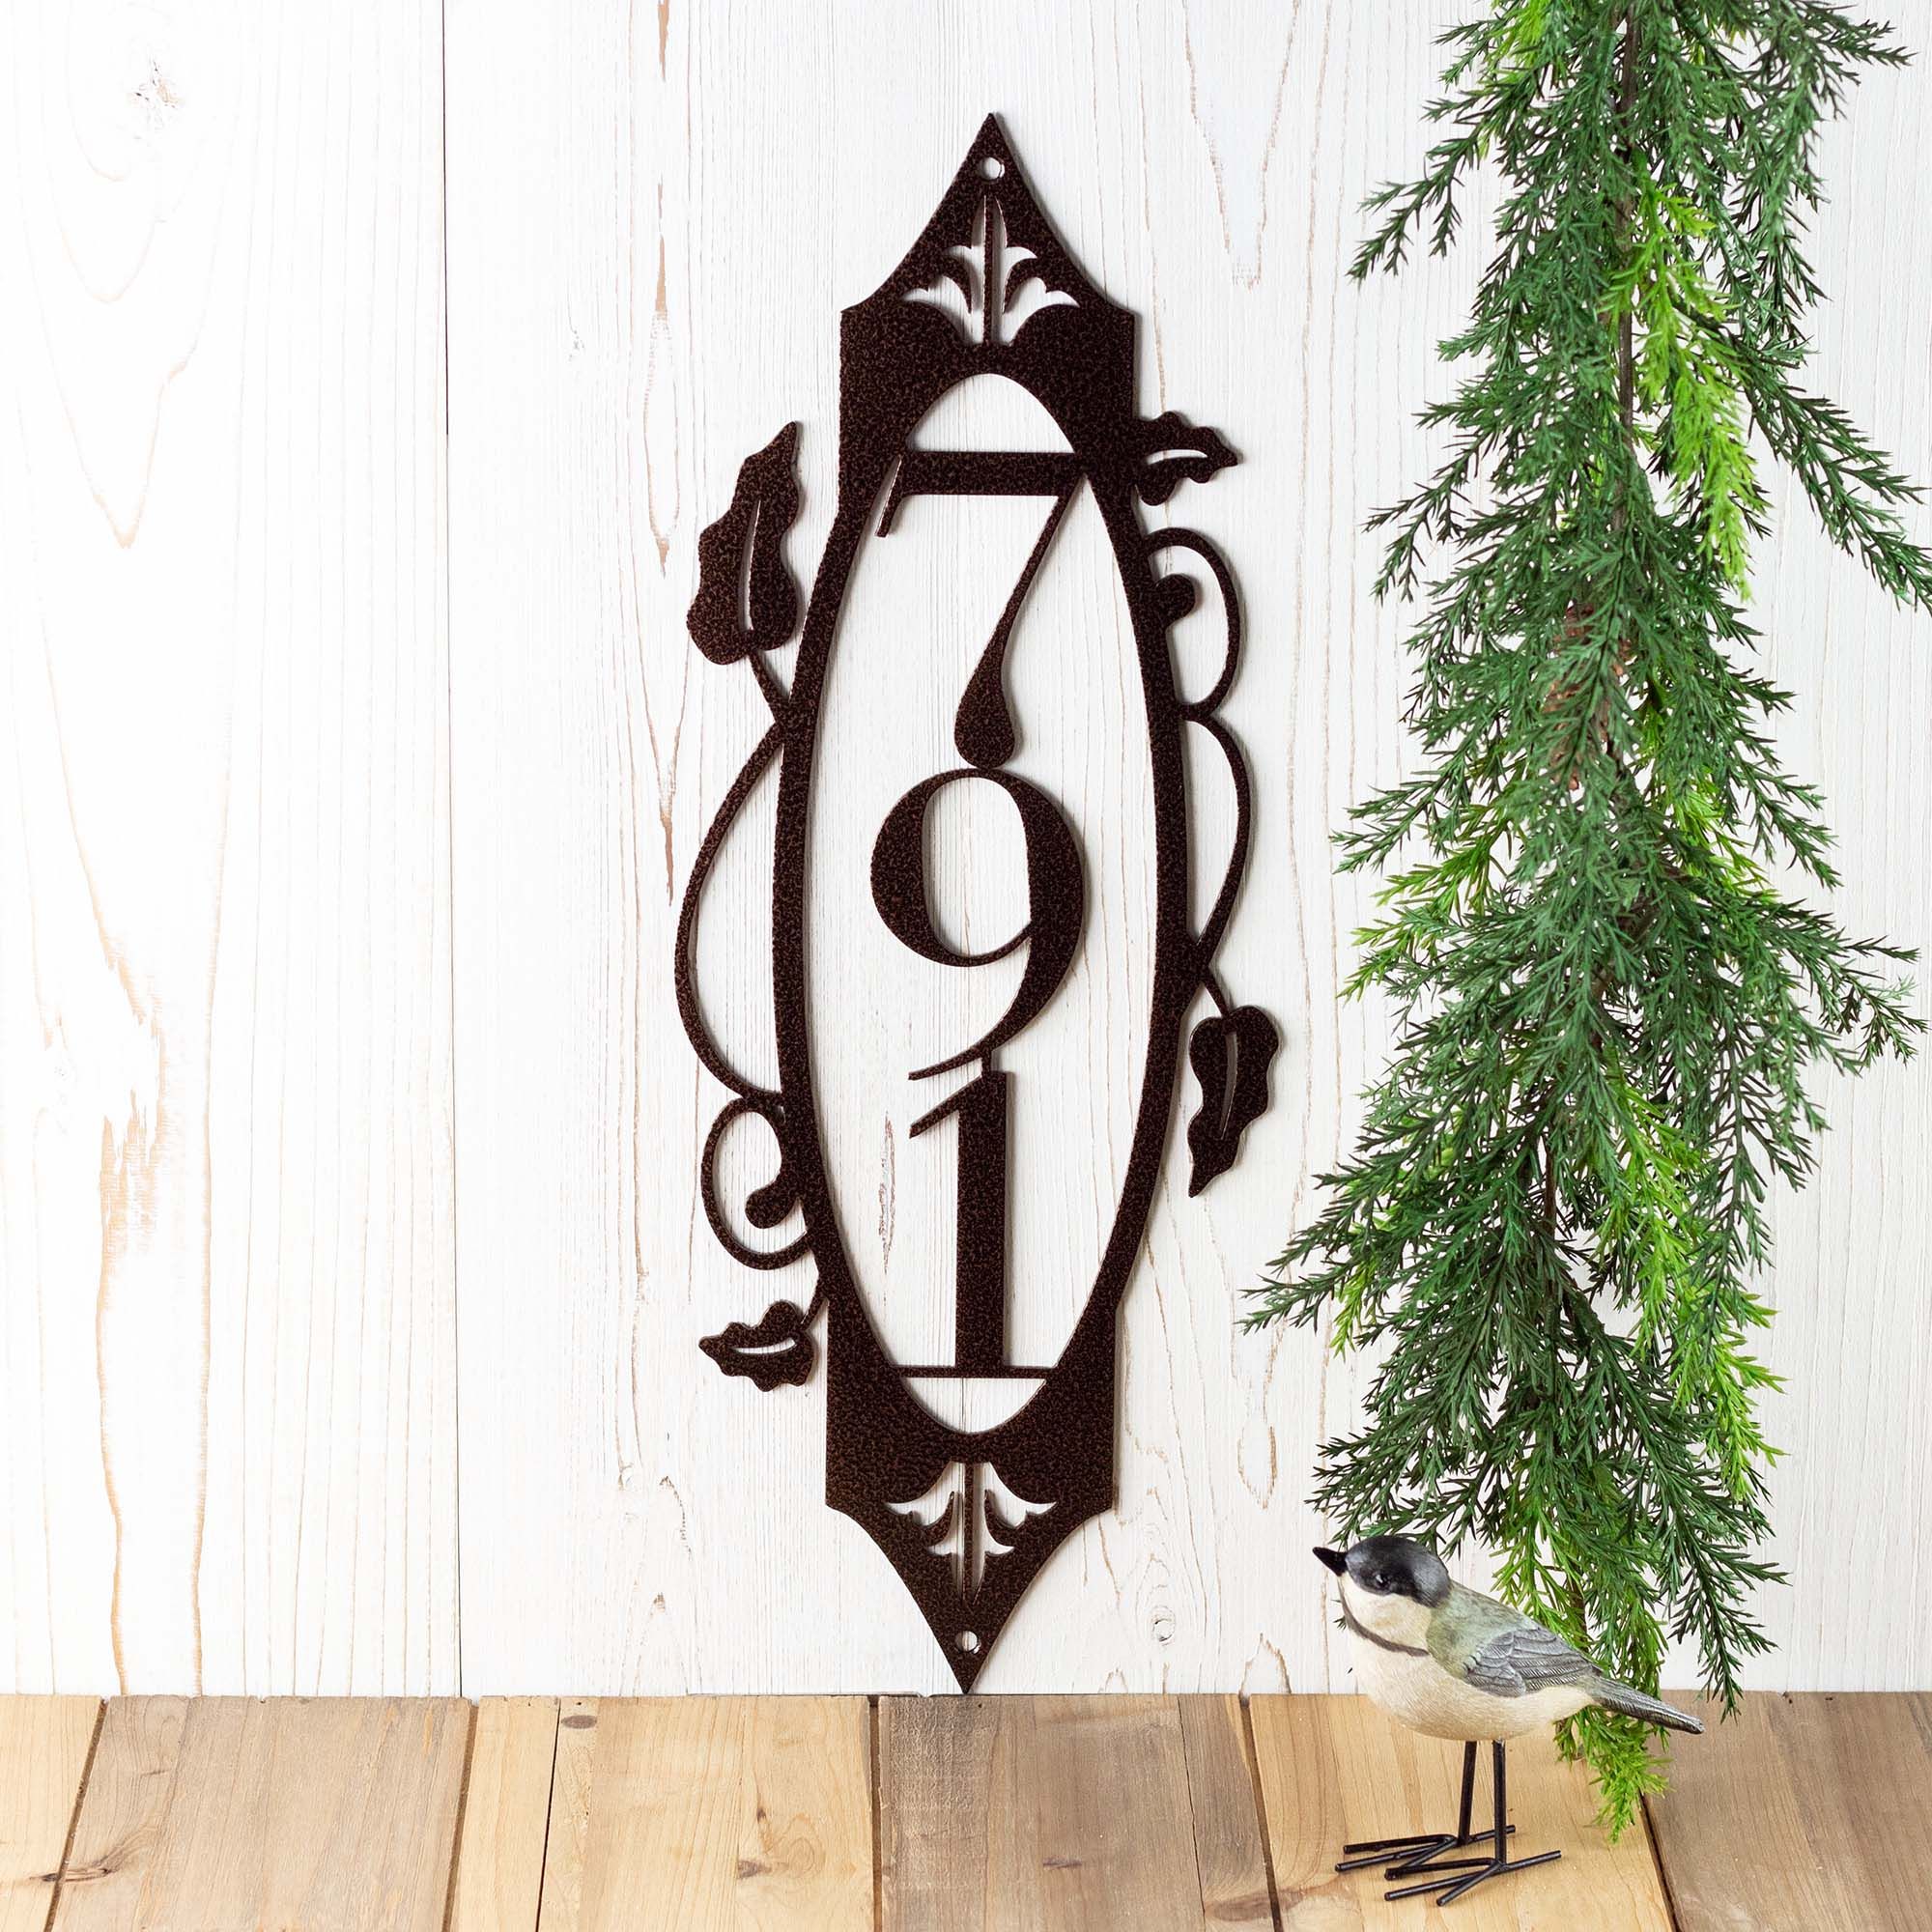 Buy Hand Crafted Custom Address Sign, Metal With Personalized